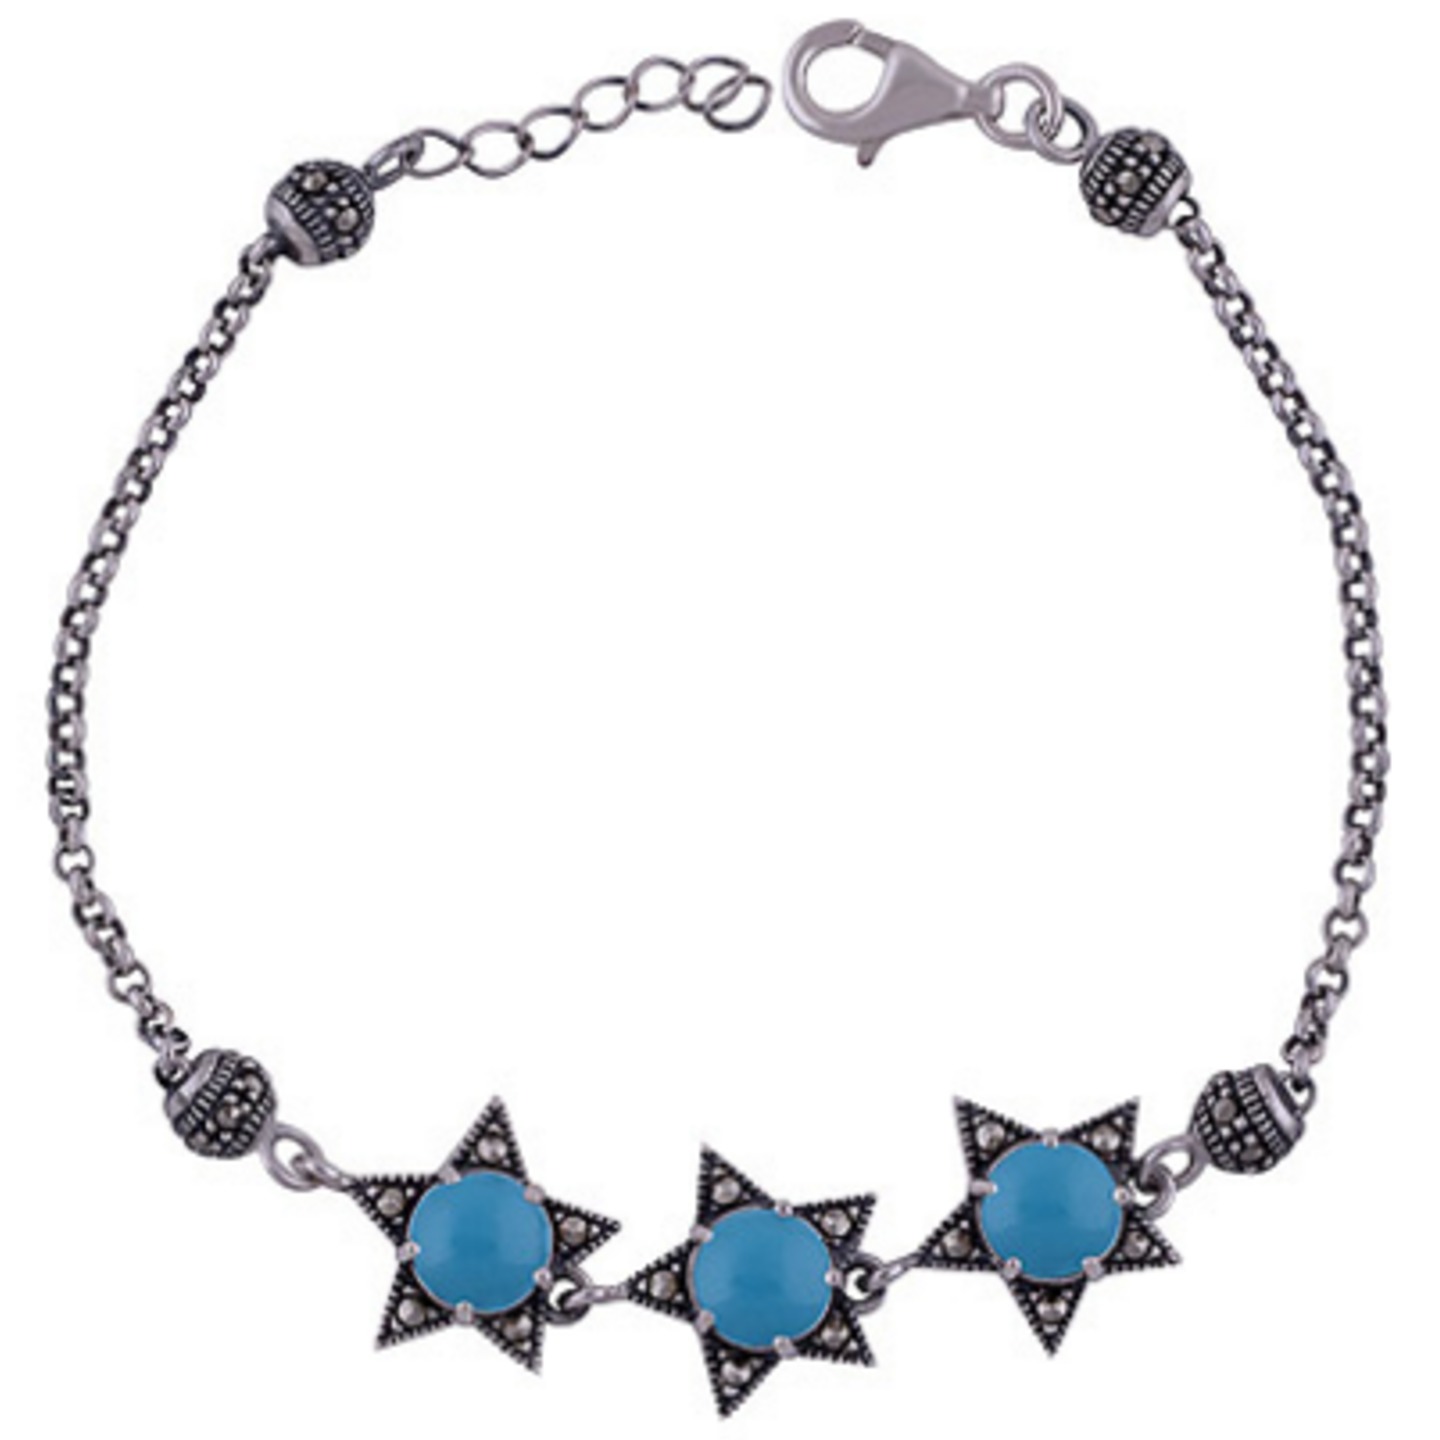 The Turquoise Star Silver Bracelet